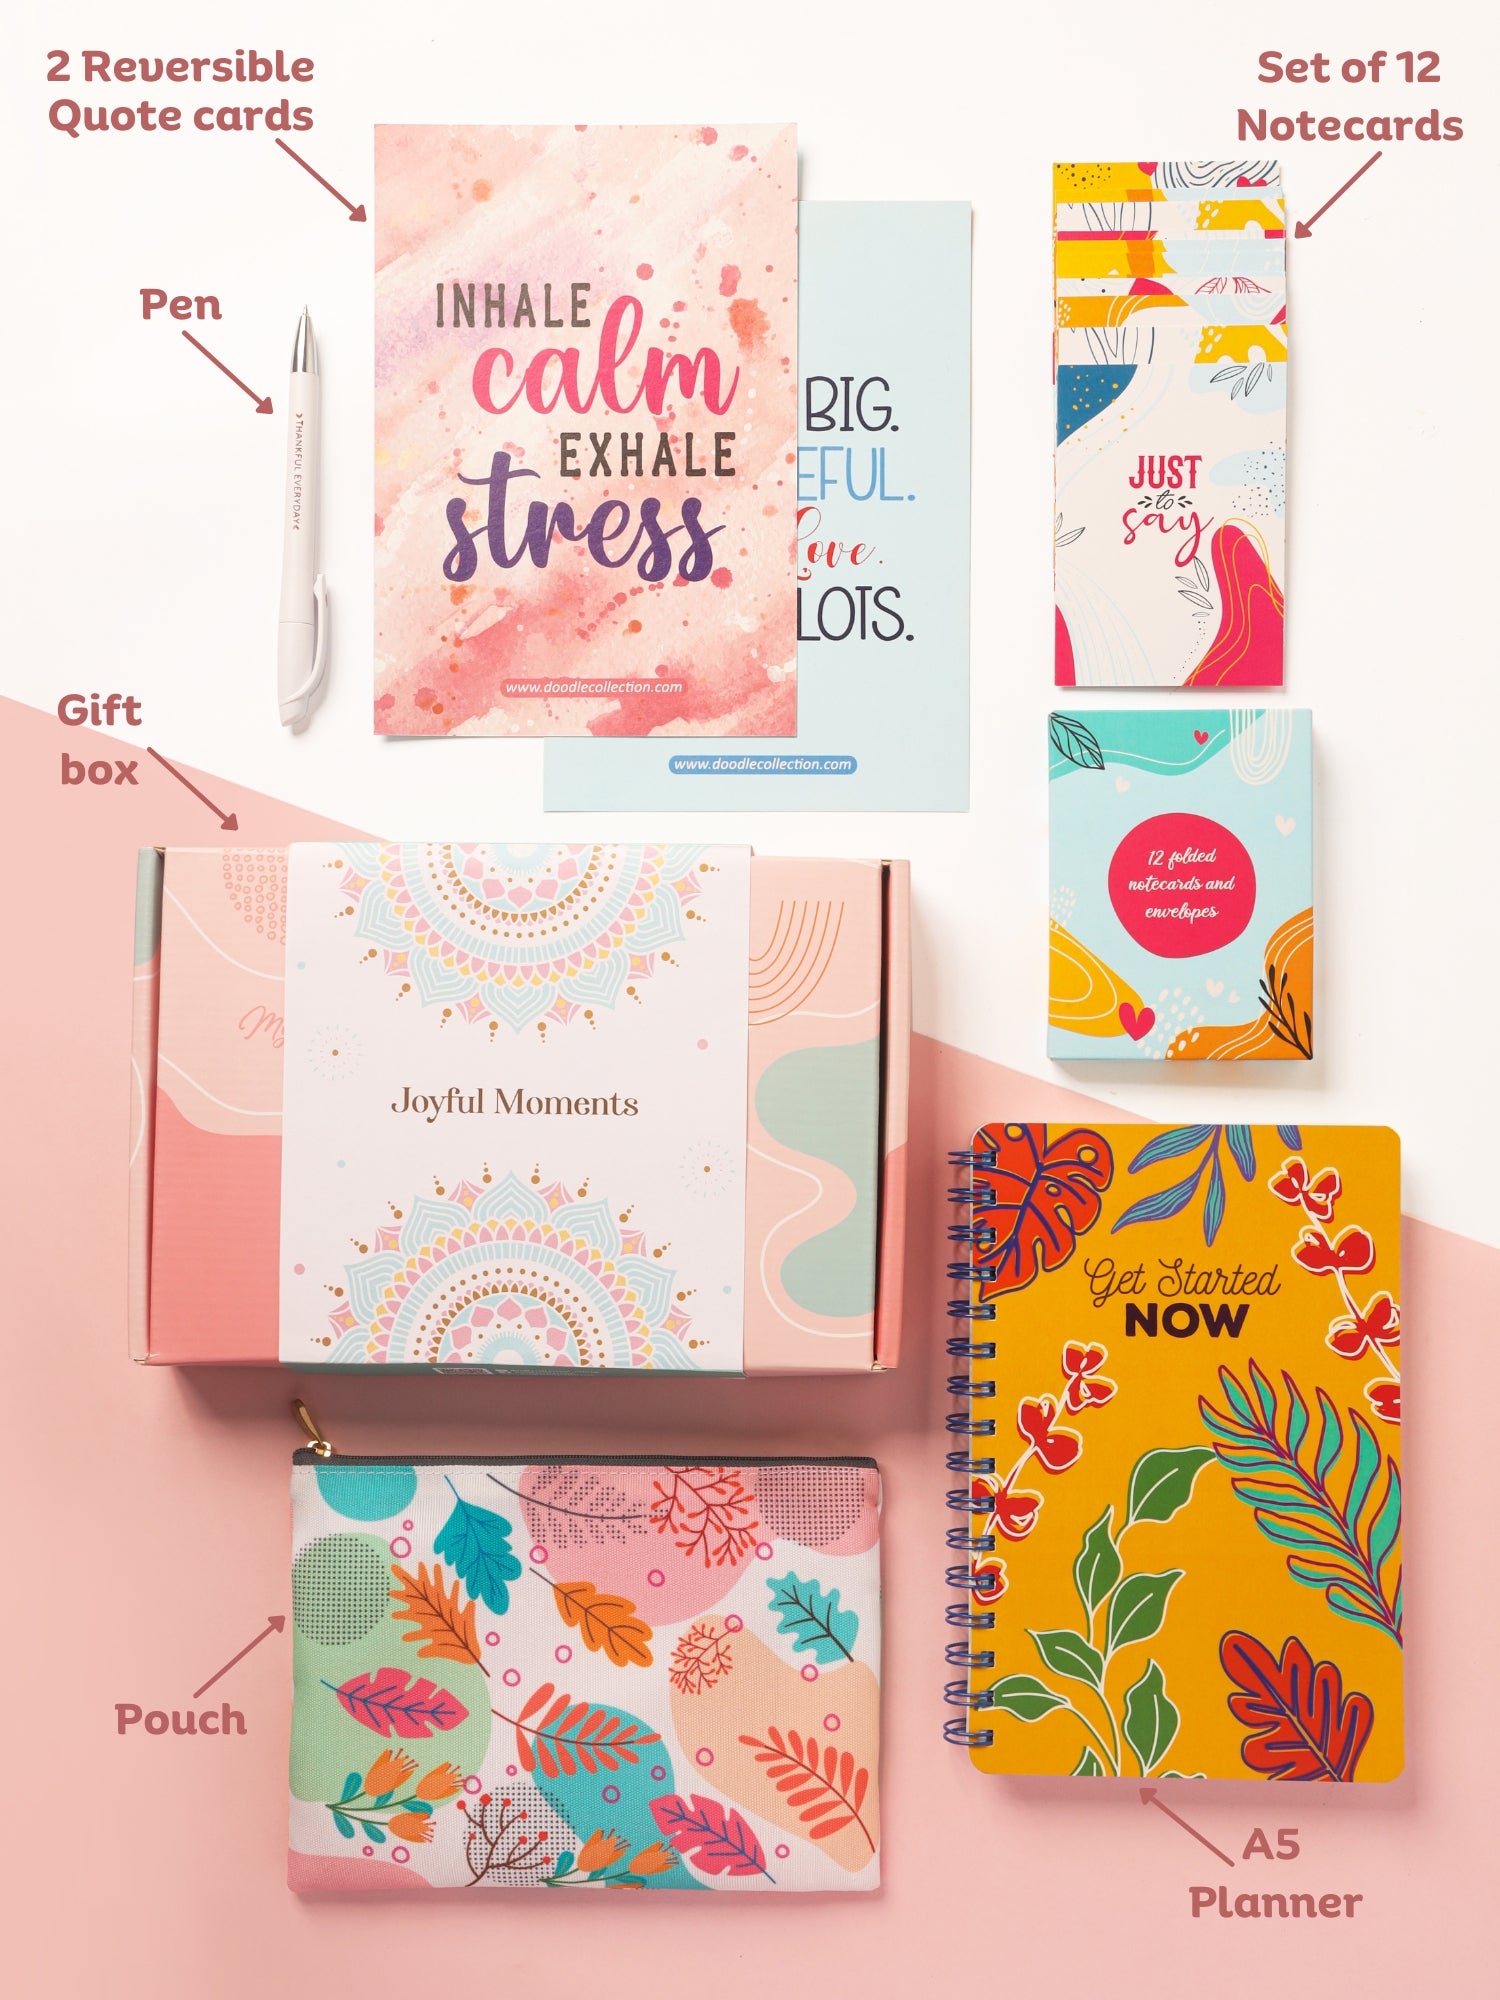 Packed in a Beautiful Festive Gift Box (Planner's Haven)